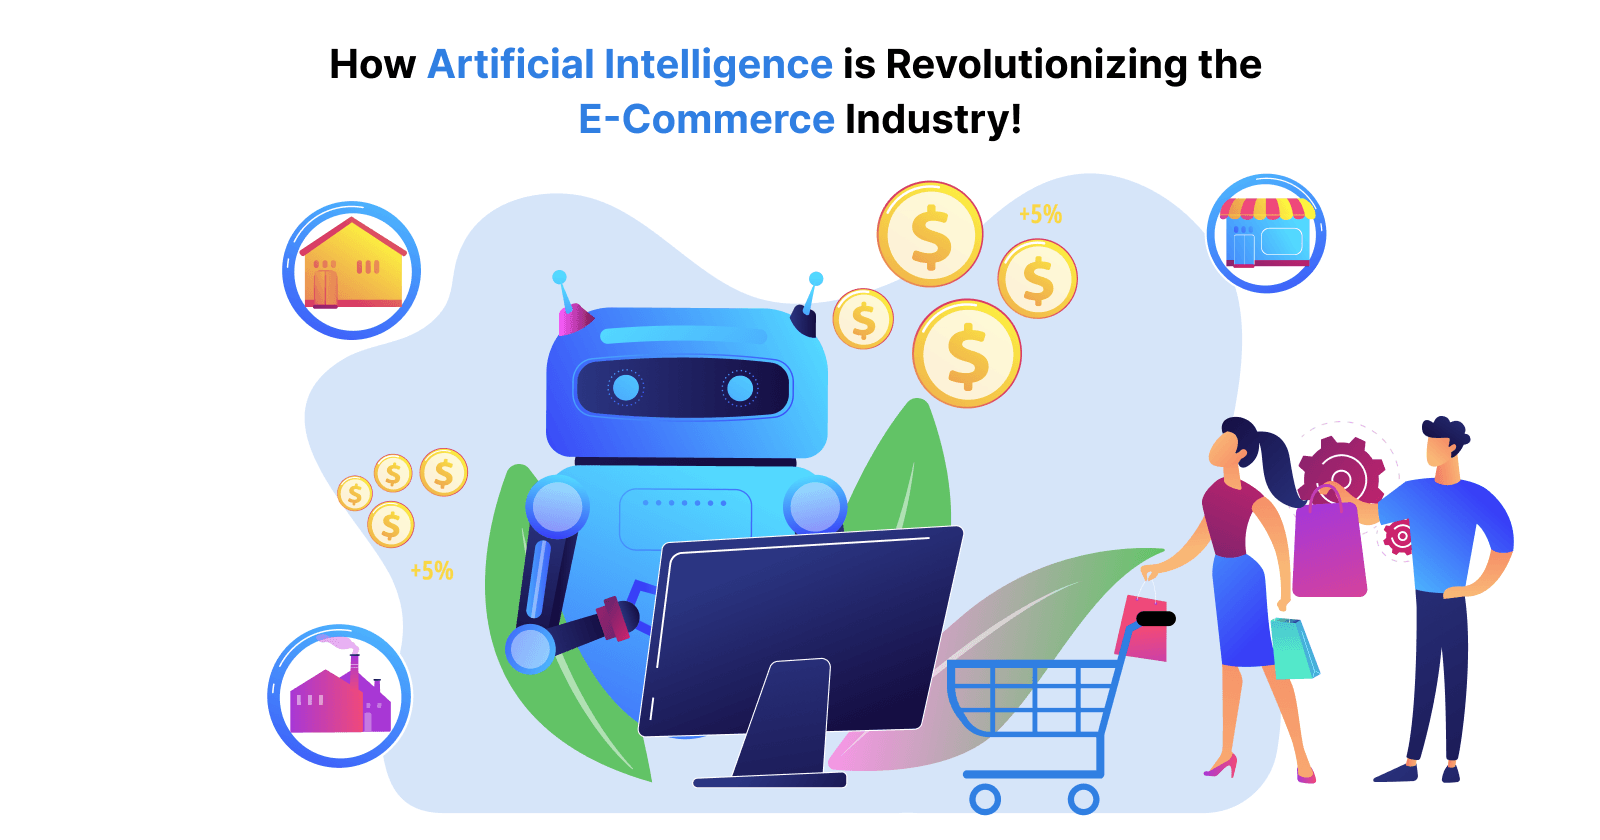 How Artificial Intelligence is Revolutionizing the E-Commerce Industry!